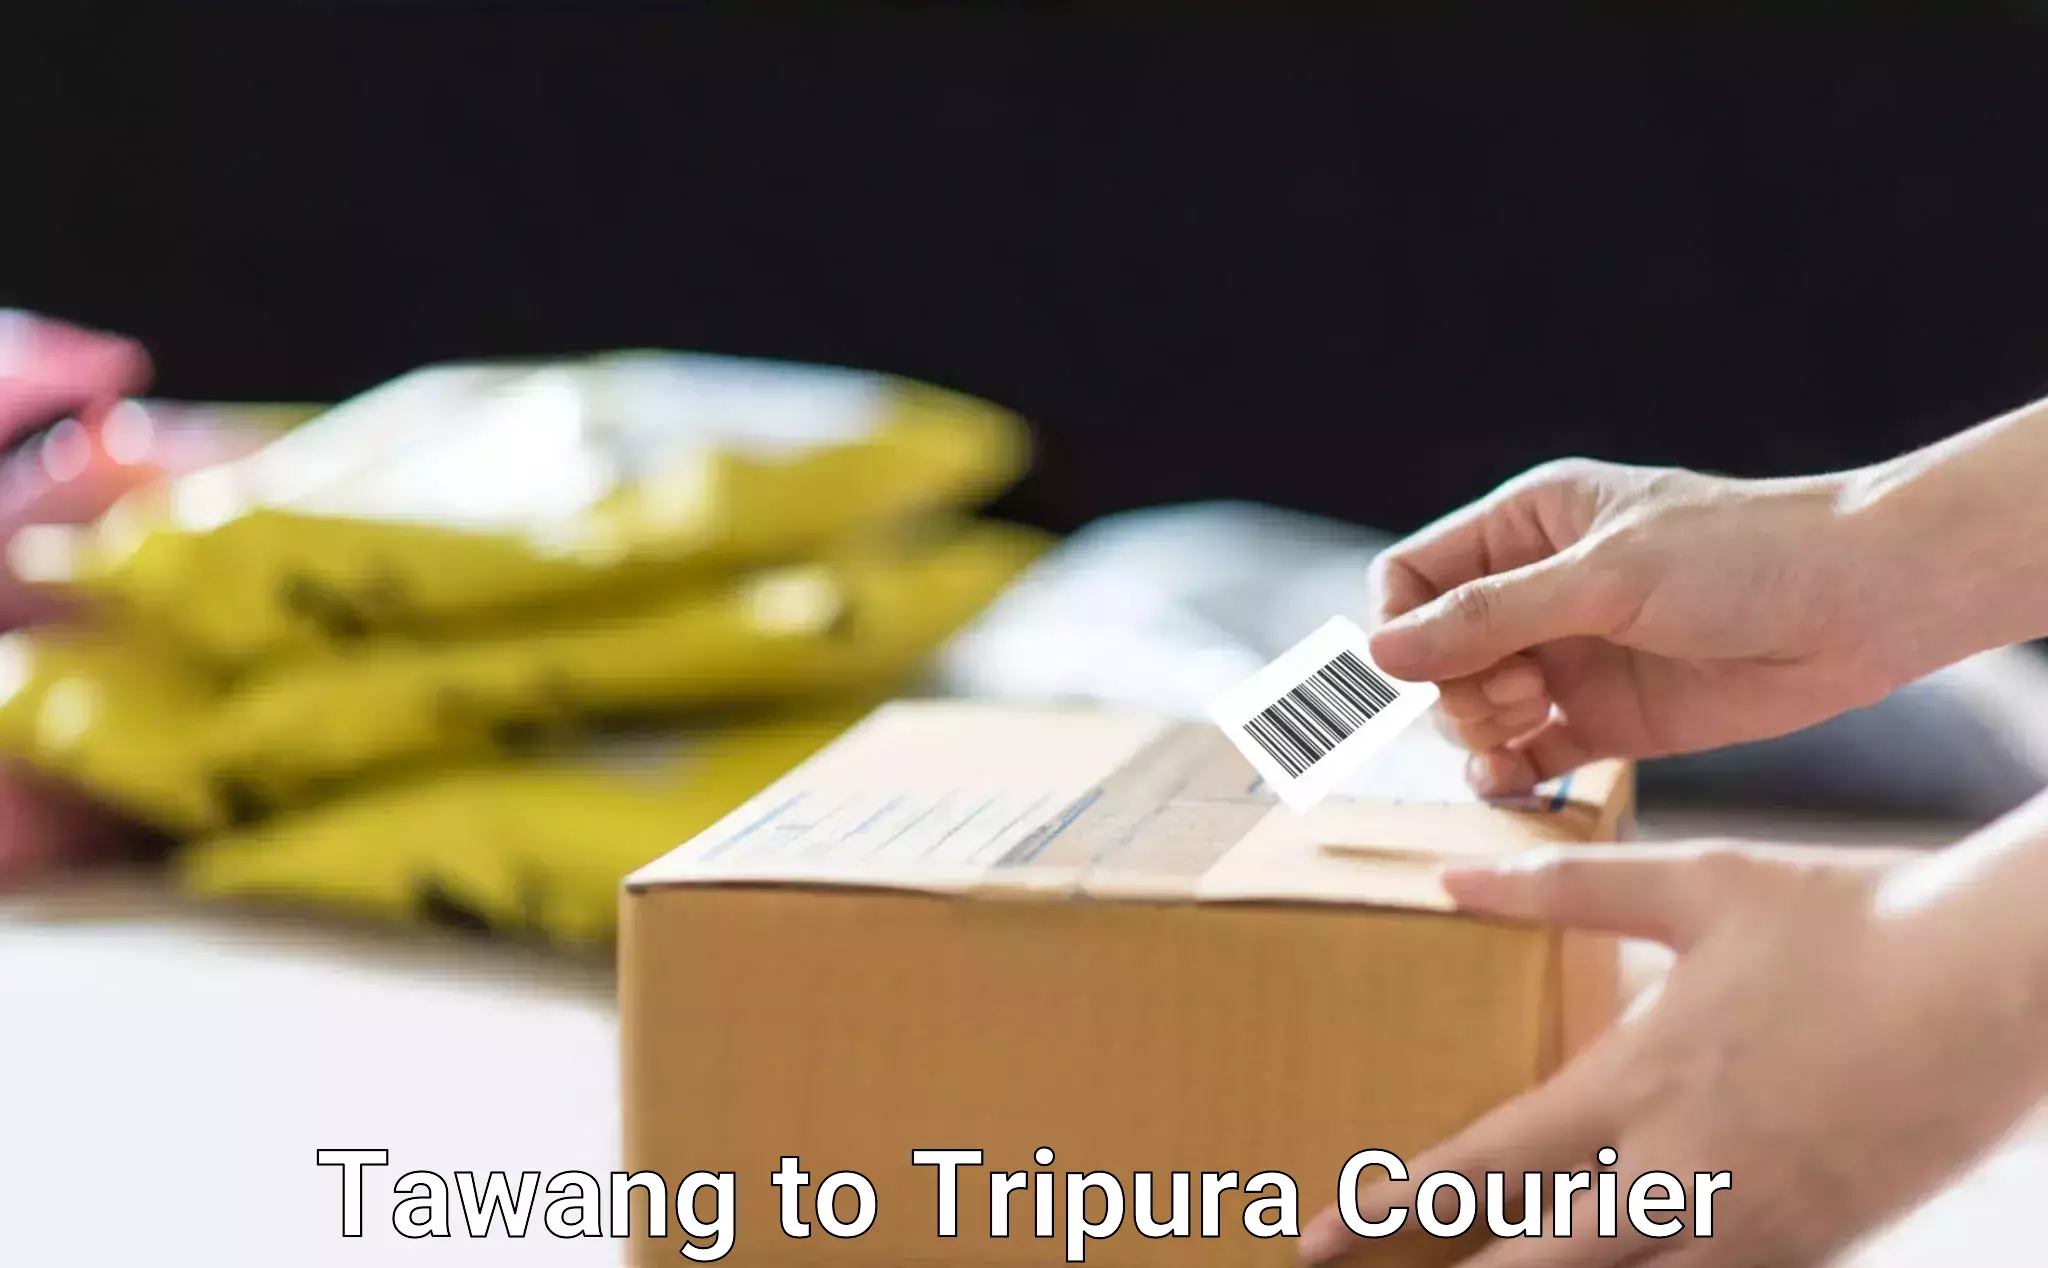 Reliable courier service Tawang to Tripura